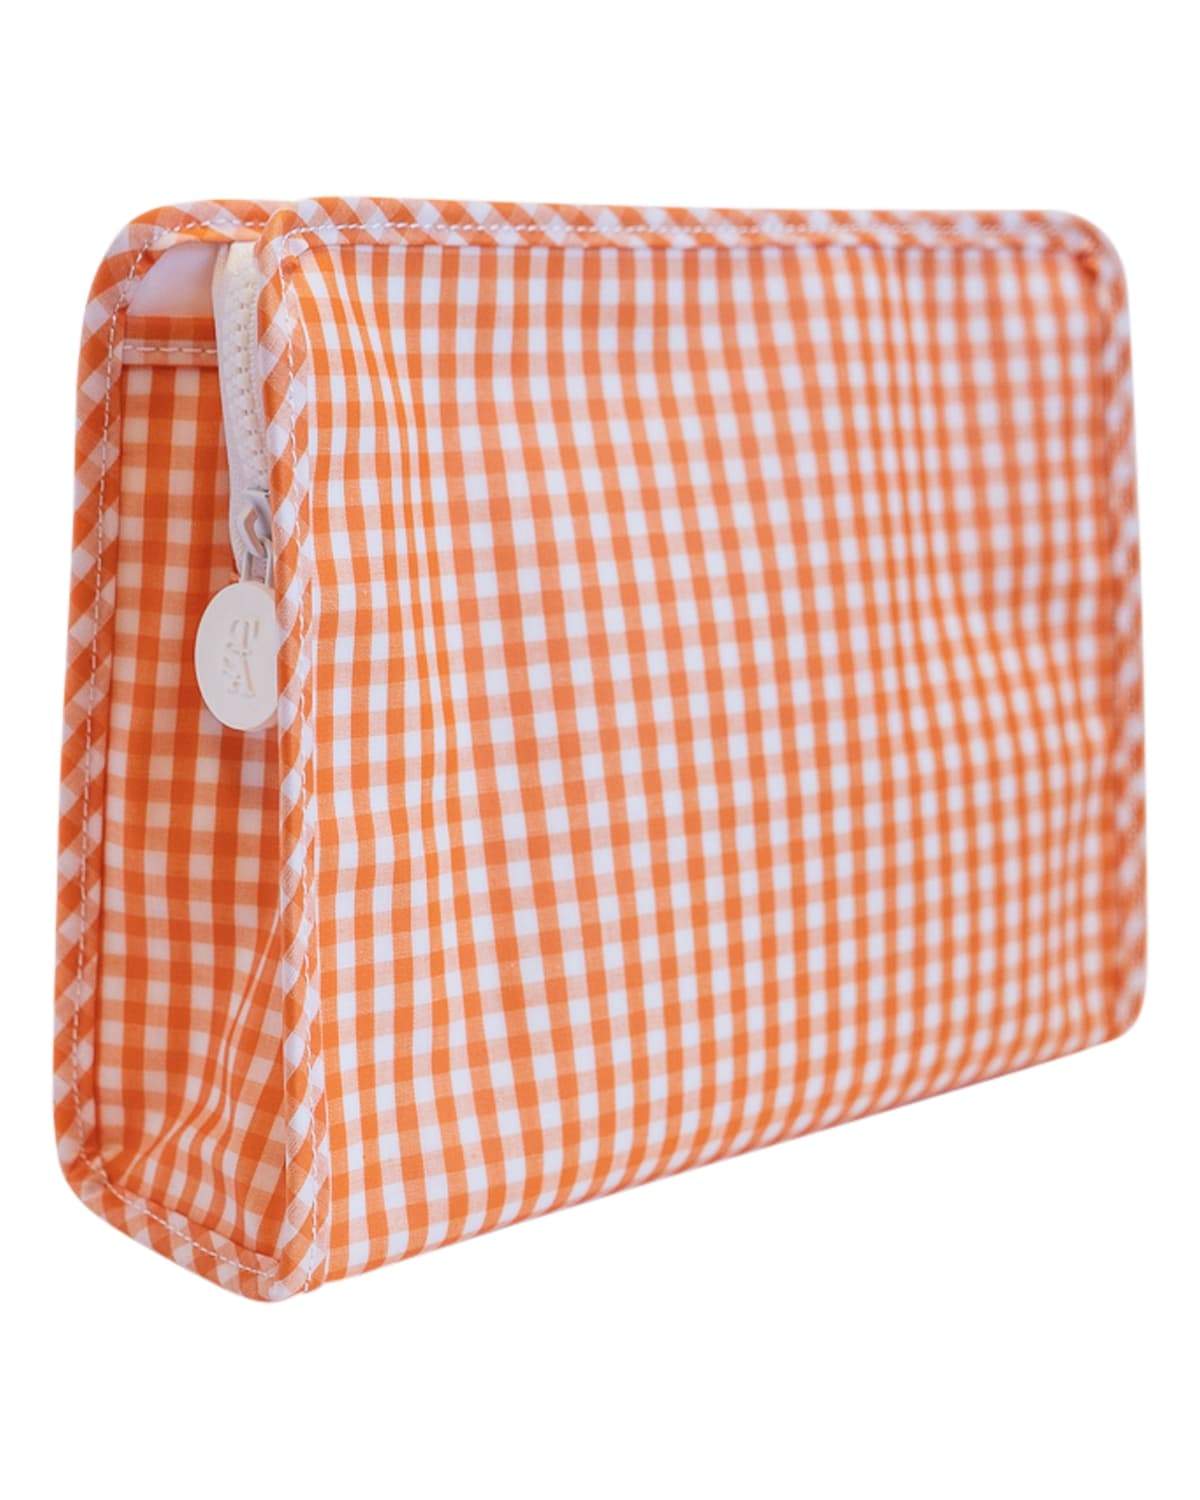 Roadie Gingham Travel Bag Medium - more colors available - The Preppy Bunny